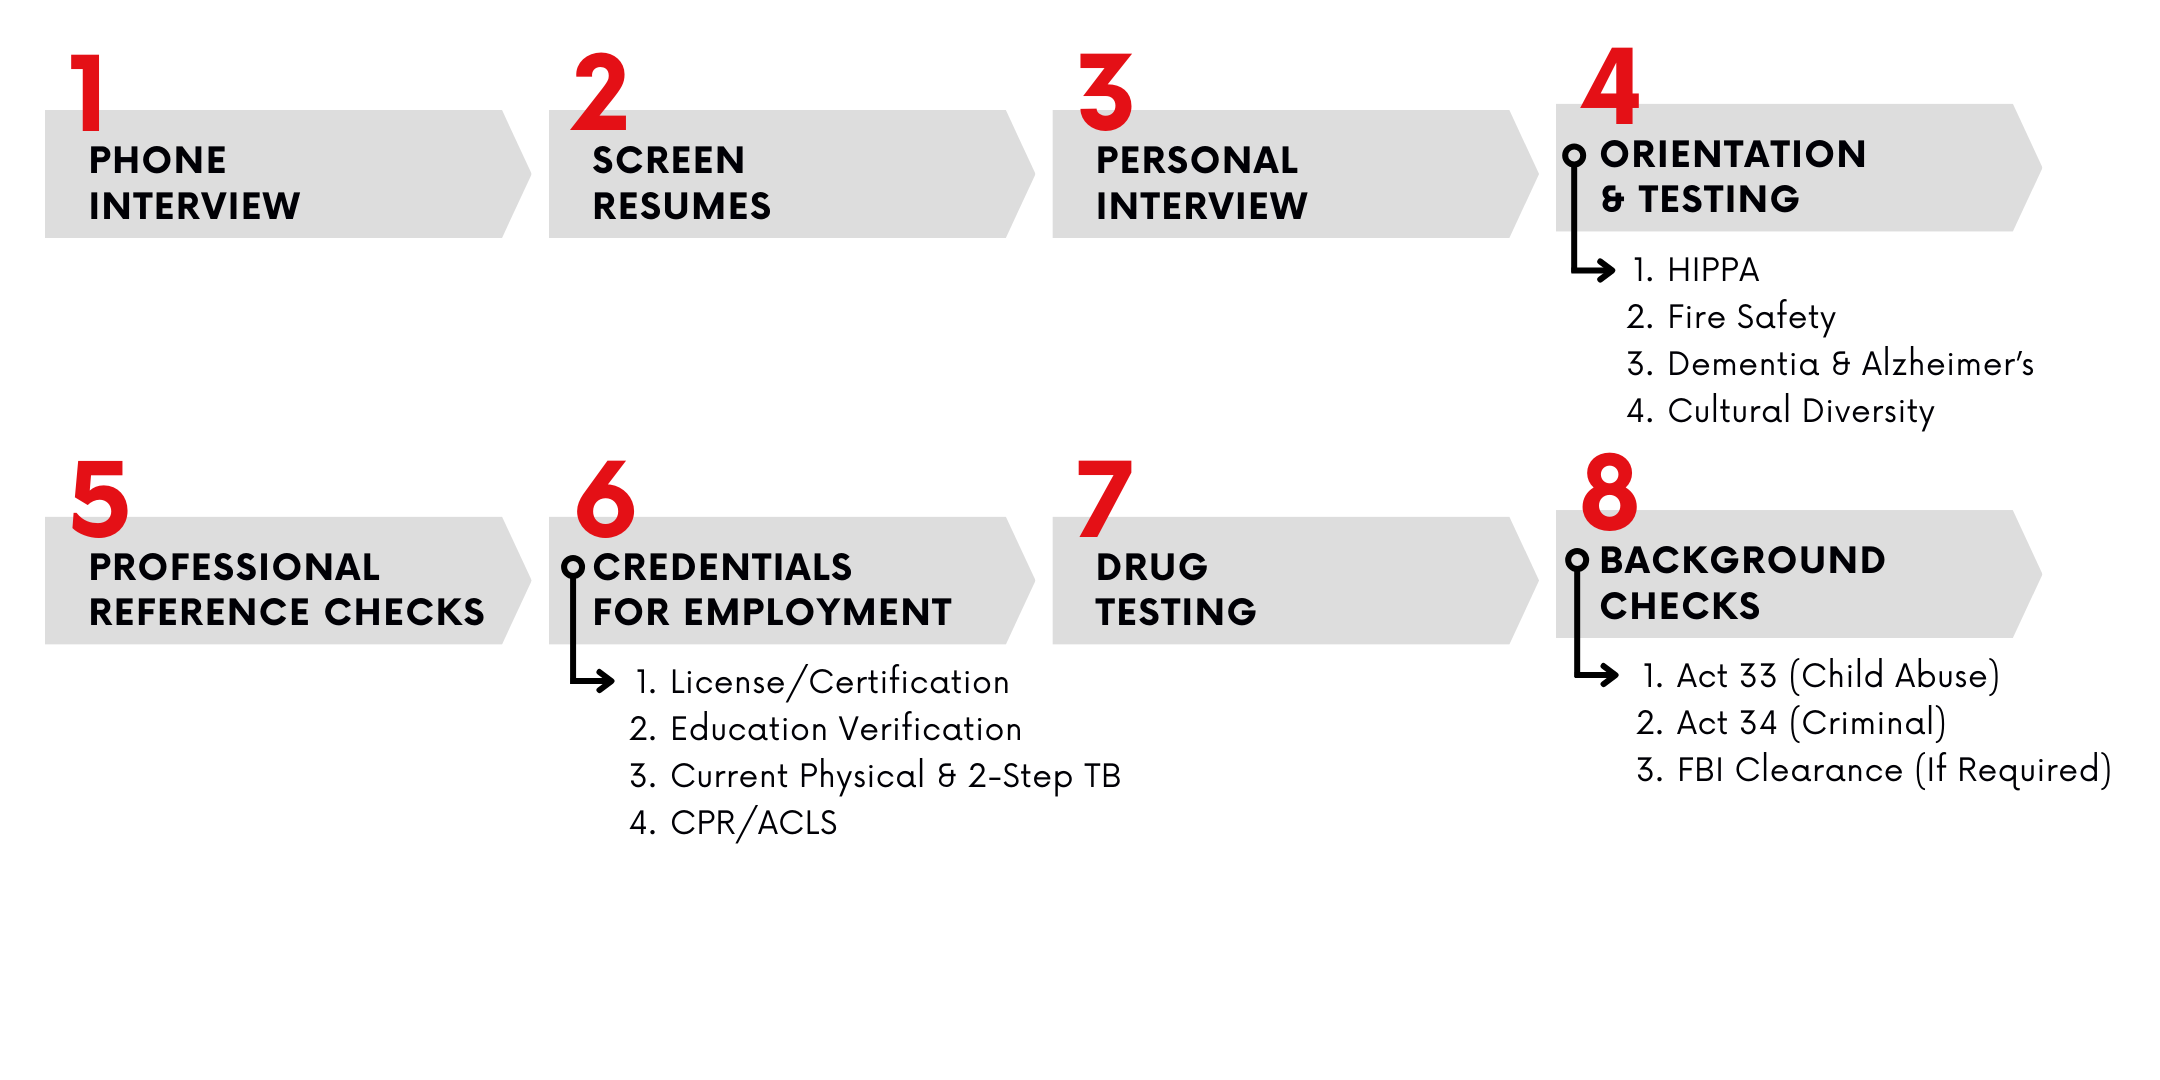 1. Phone Interview 2. Screen Resumes 3. Personal Interview 4. Orientation & Testing 5. Professional Reference Checks 6. Credentials for Employment 7. Drug Testing 8. Background Checks